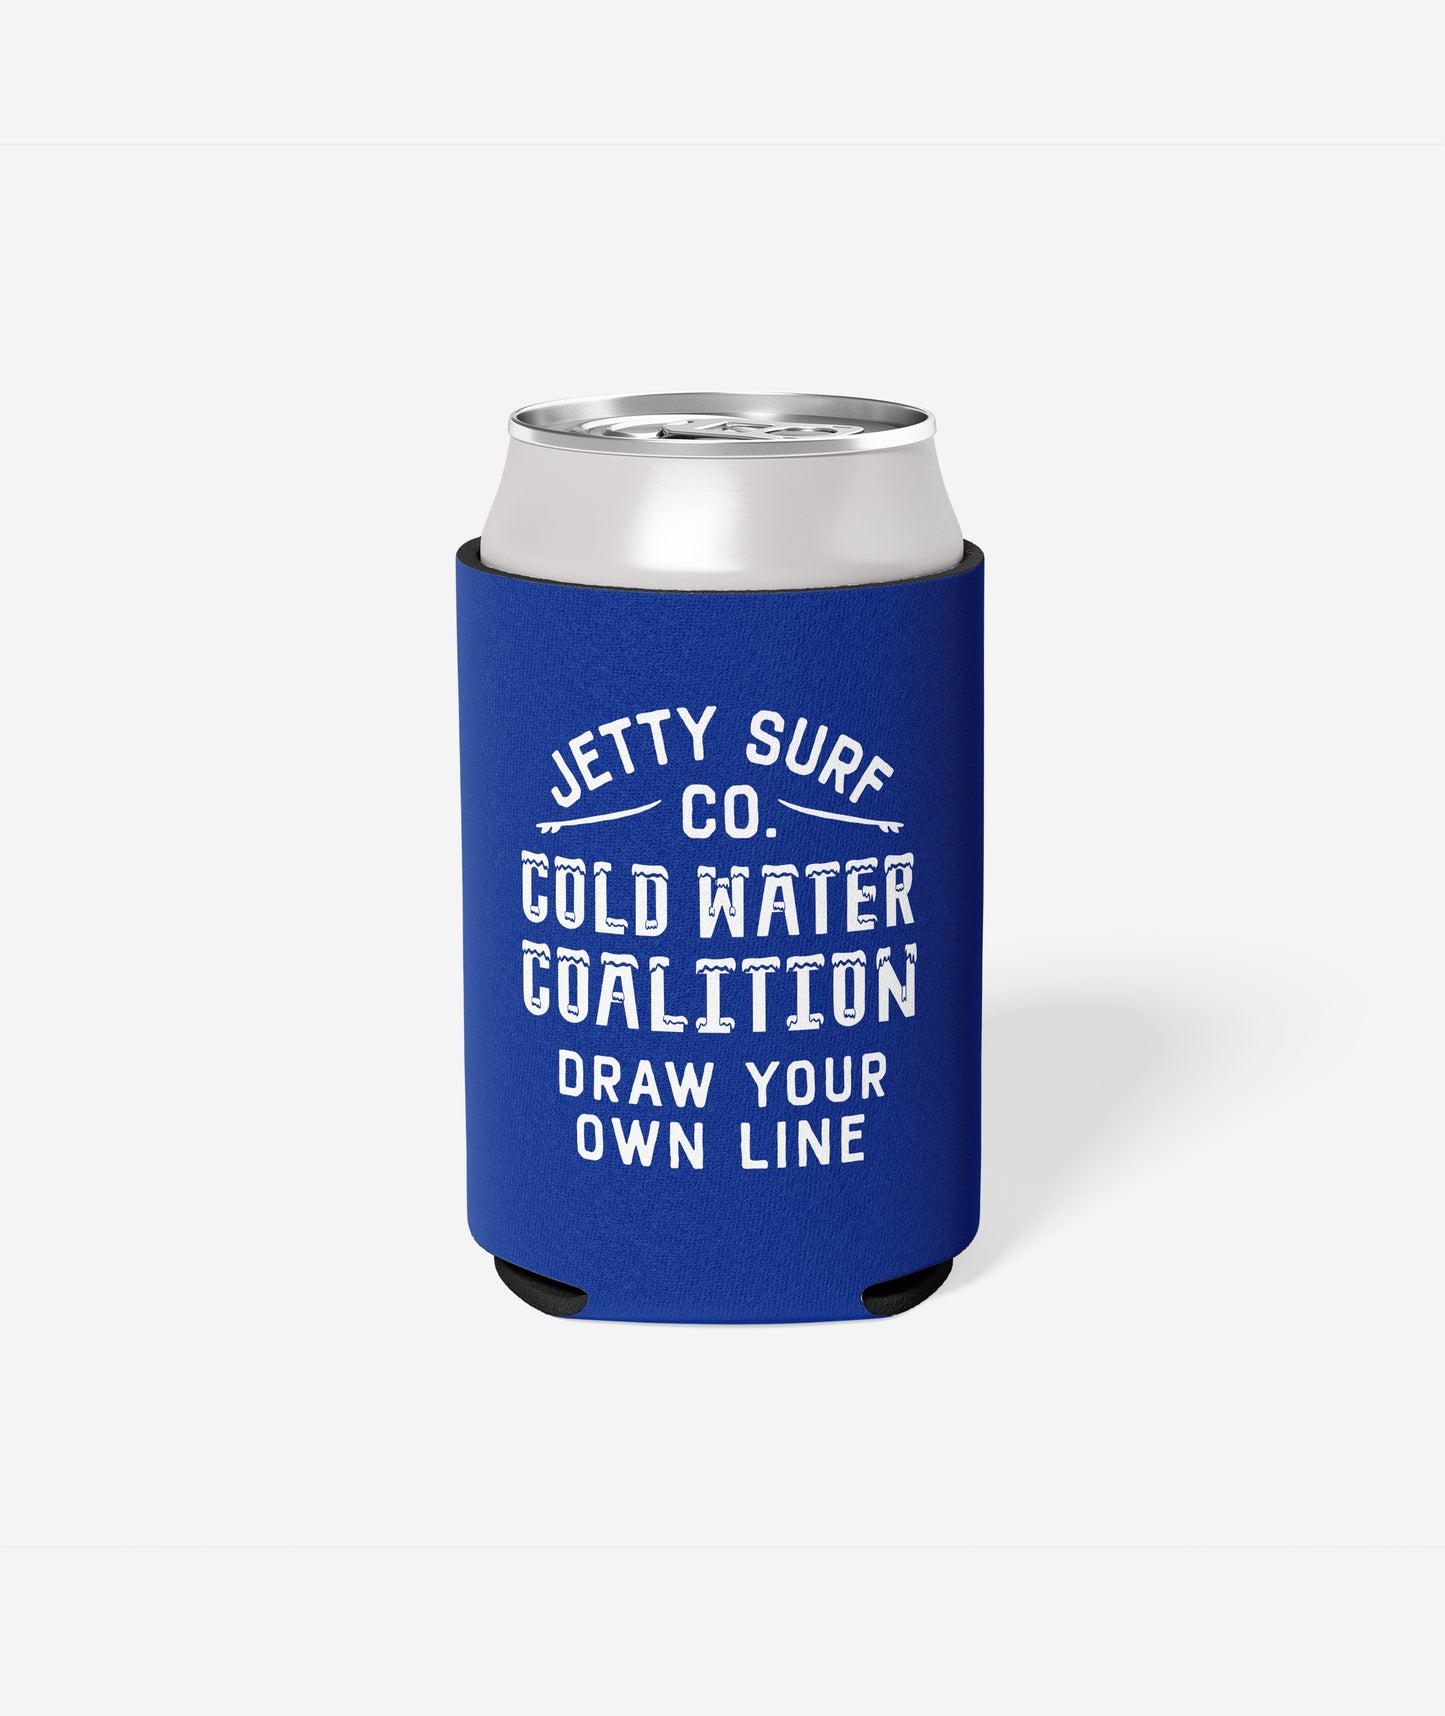 Cold Water Coalition Coolie - Royal Blue